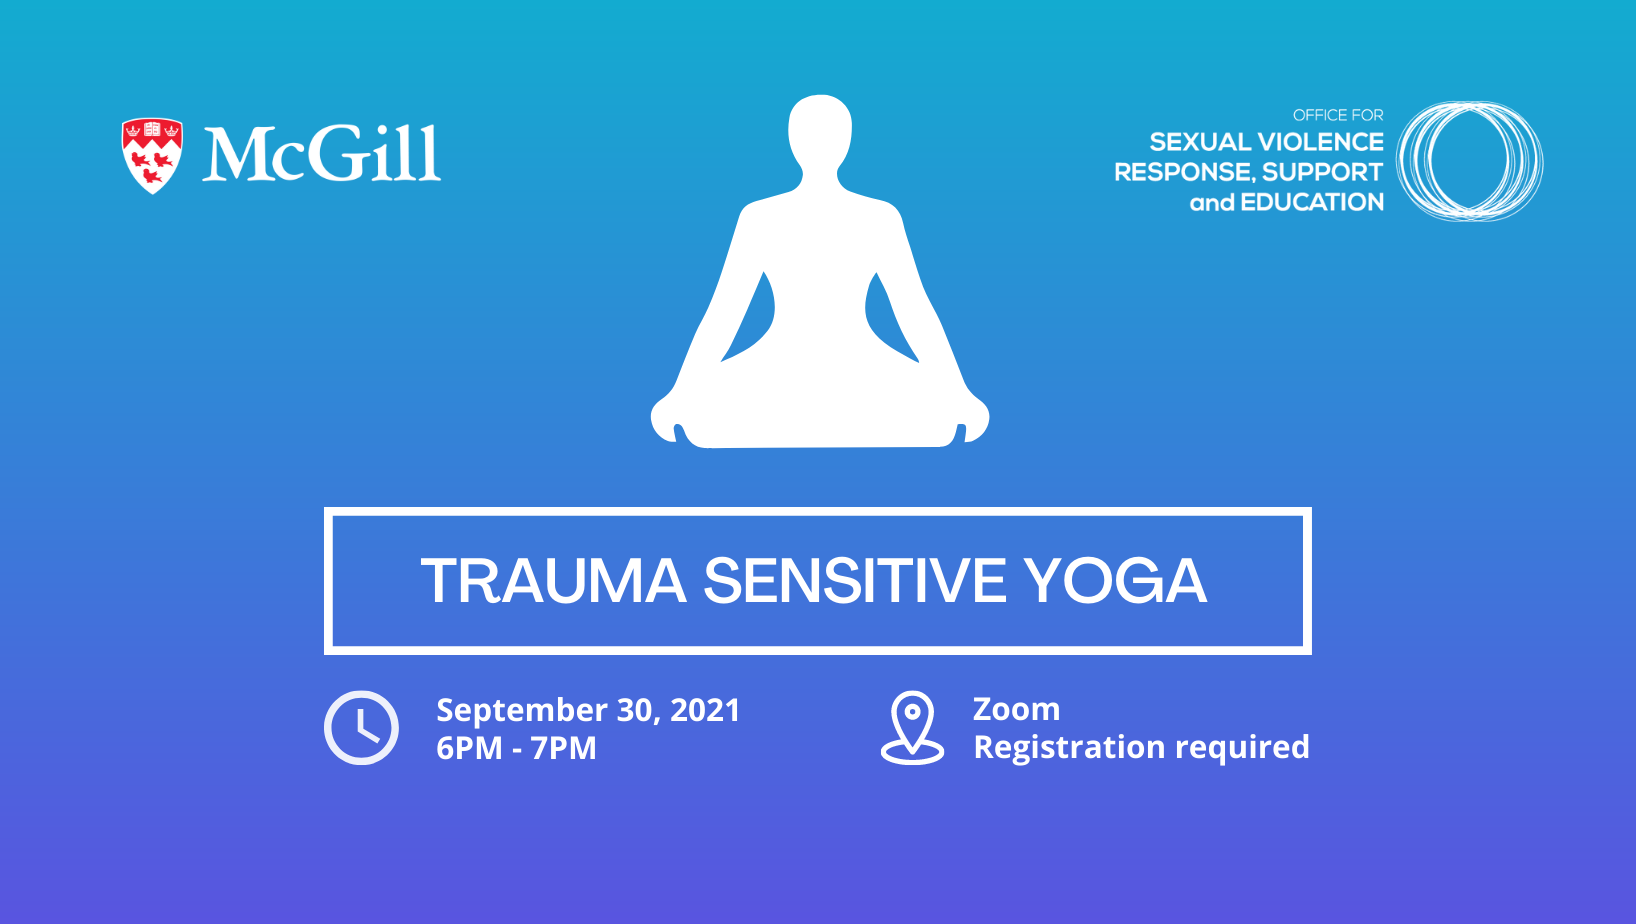 Trauma sensitive yoga in white text on a light blue background, above the text is a silhouette of a person sitting cross legged